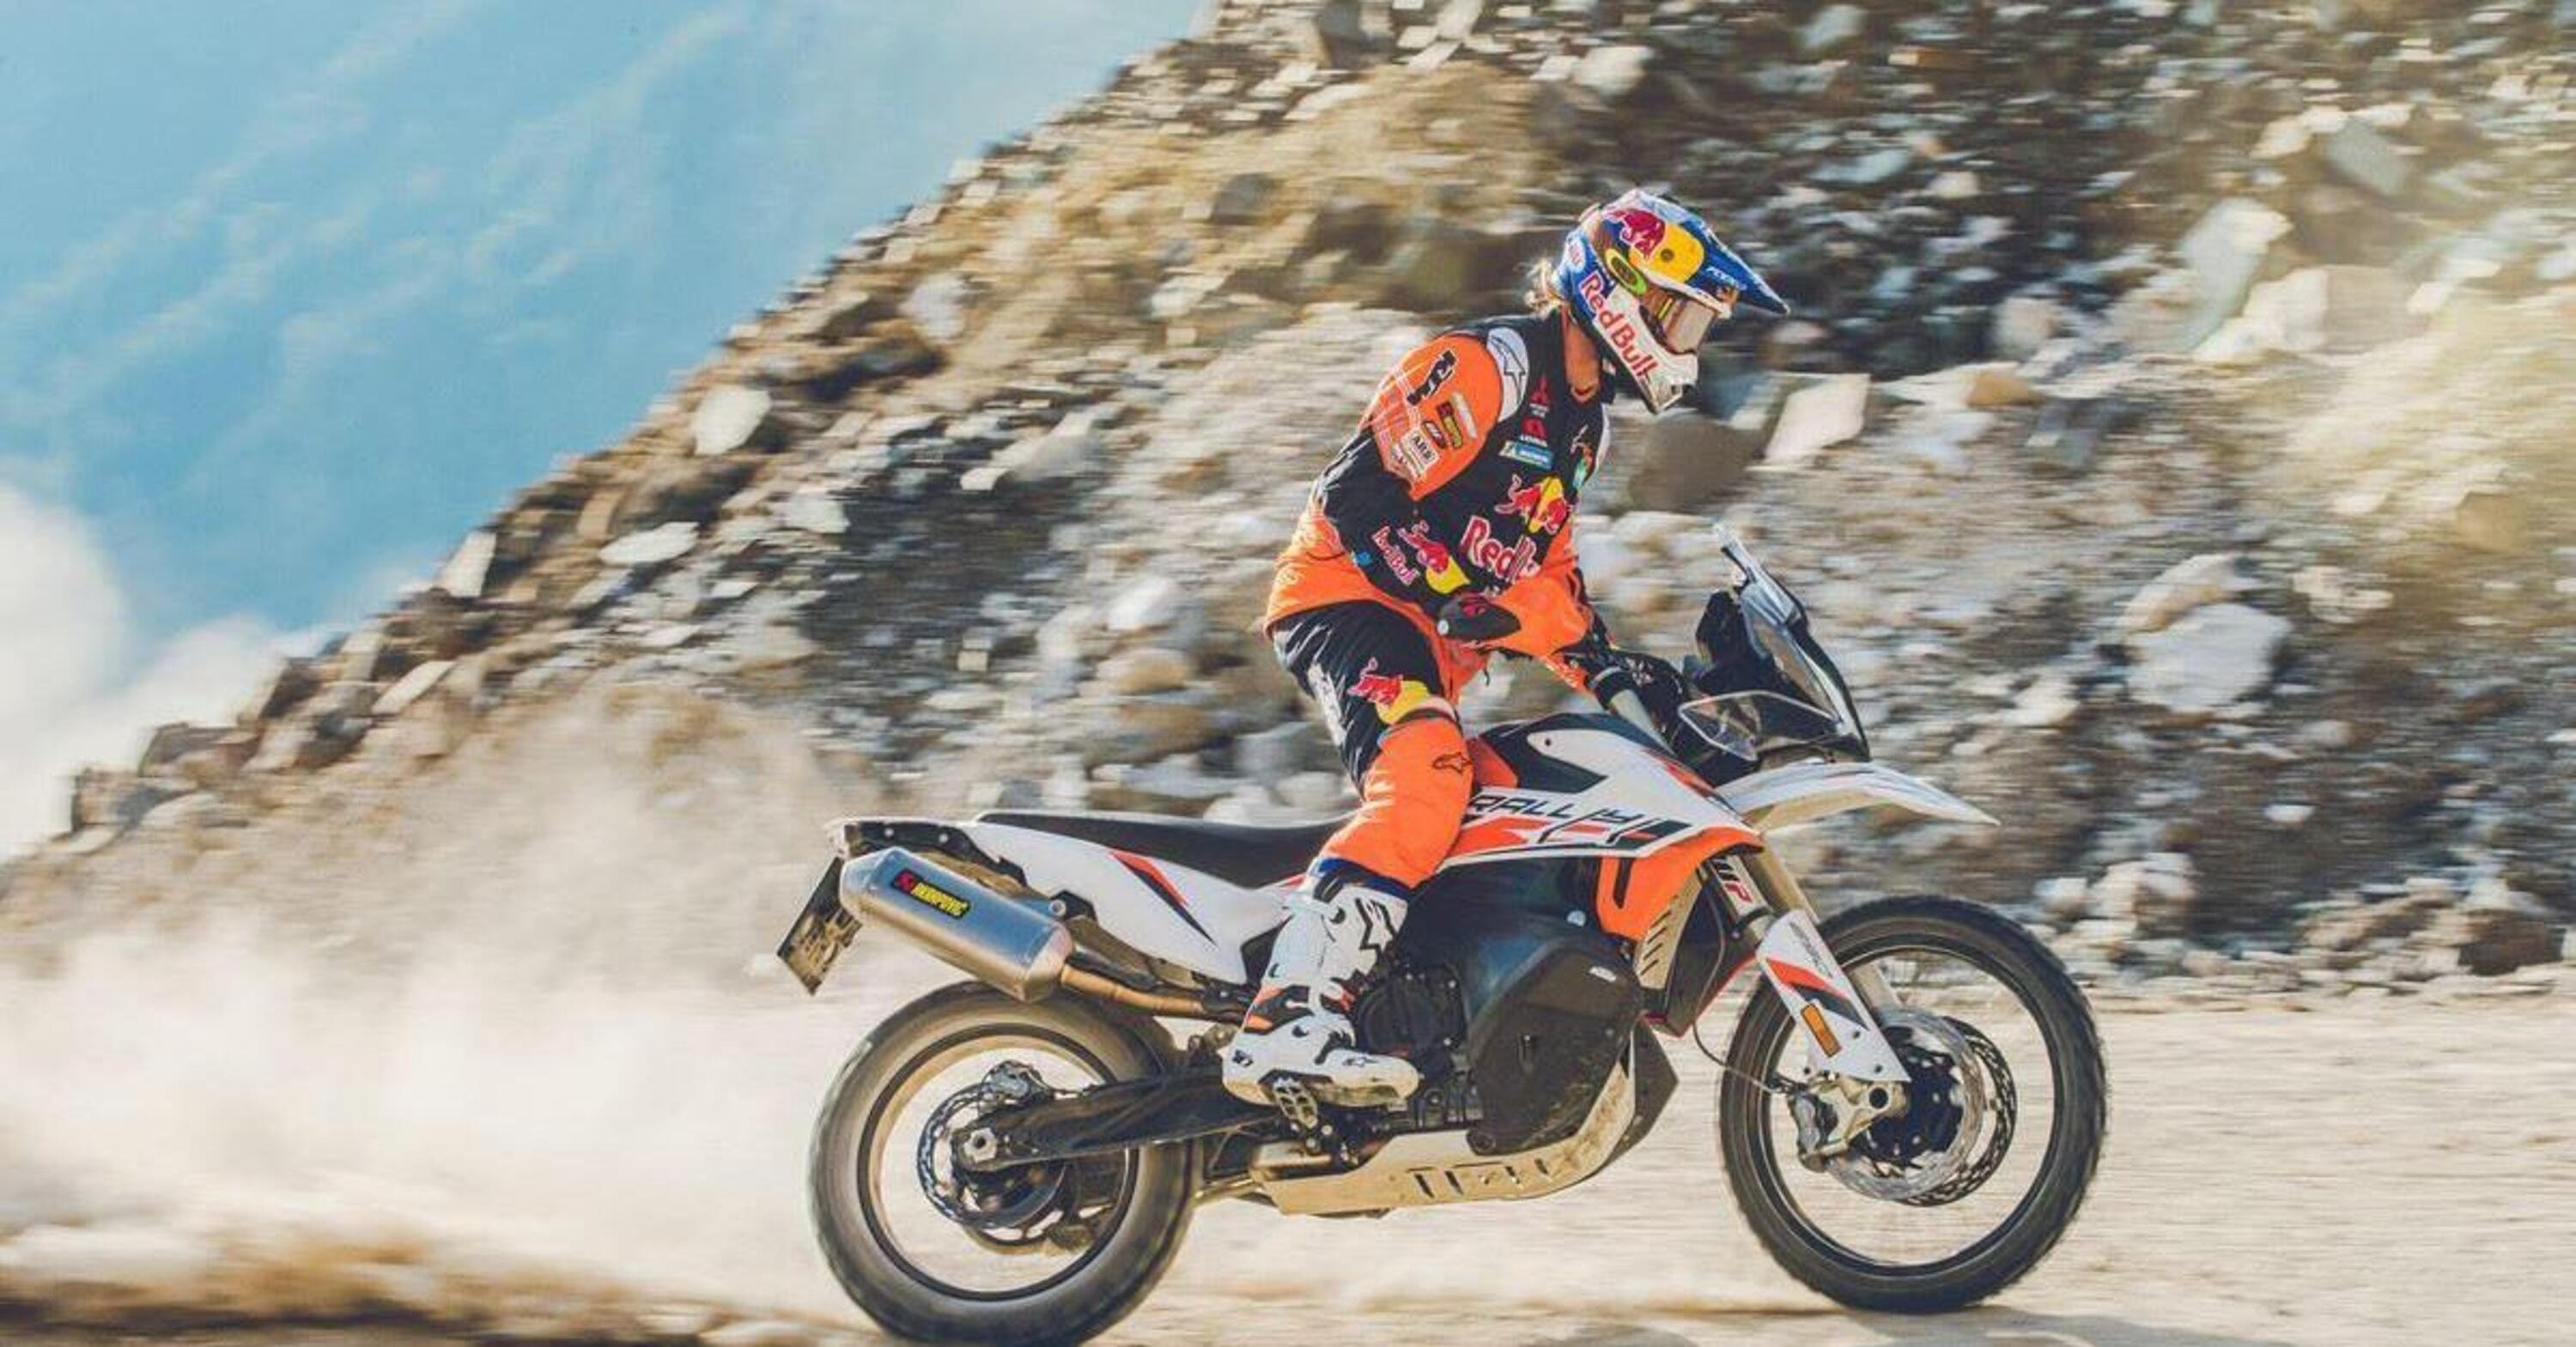 La KTM 890 Adventure R Rally sold out in 48 ore!